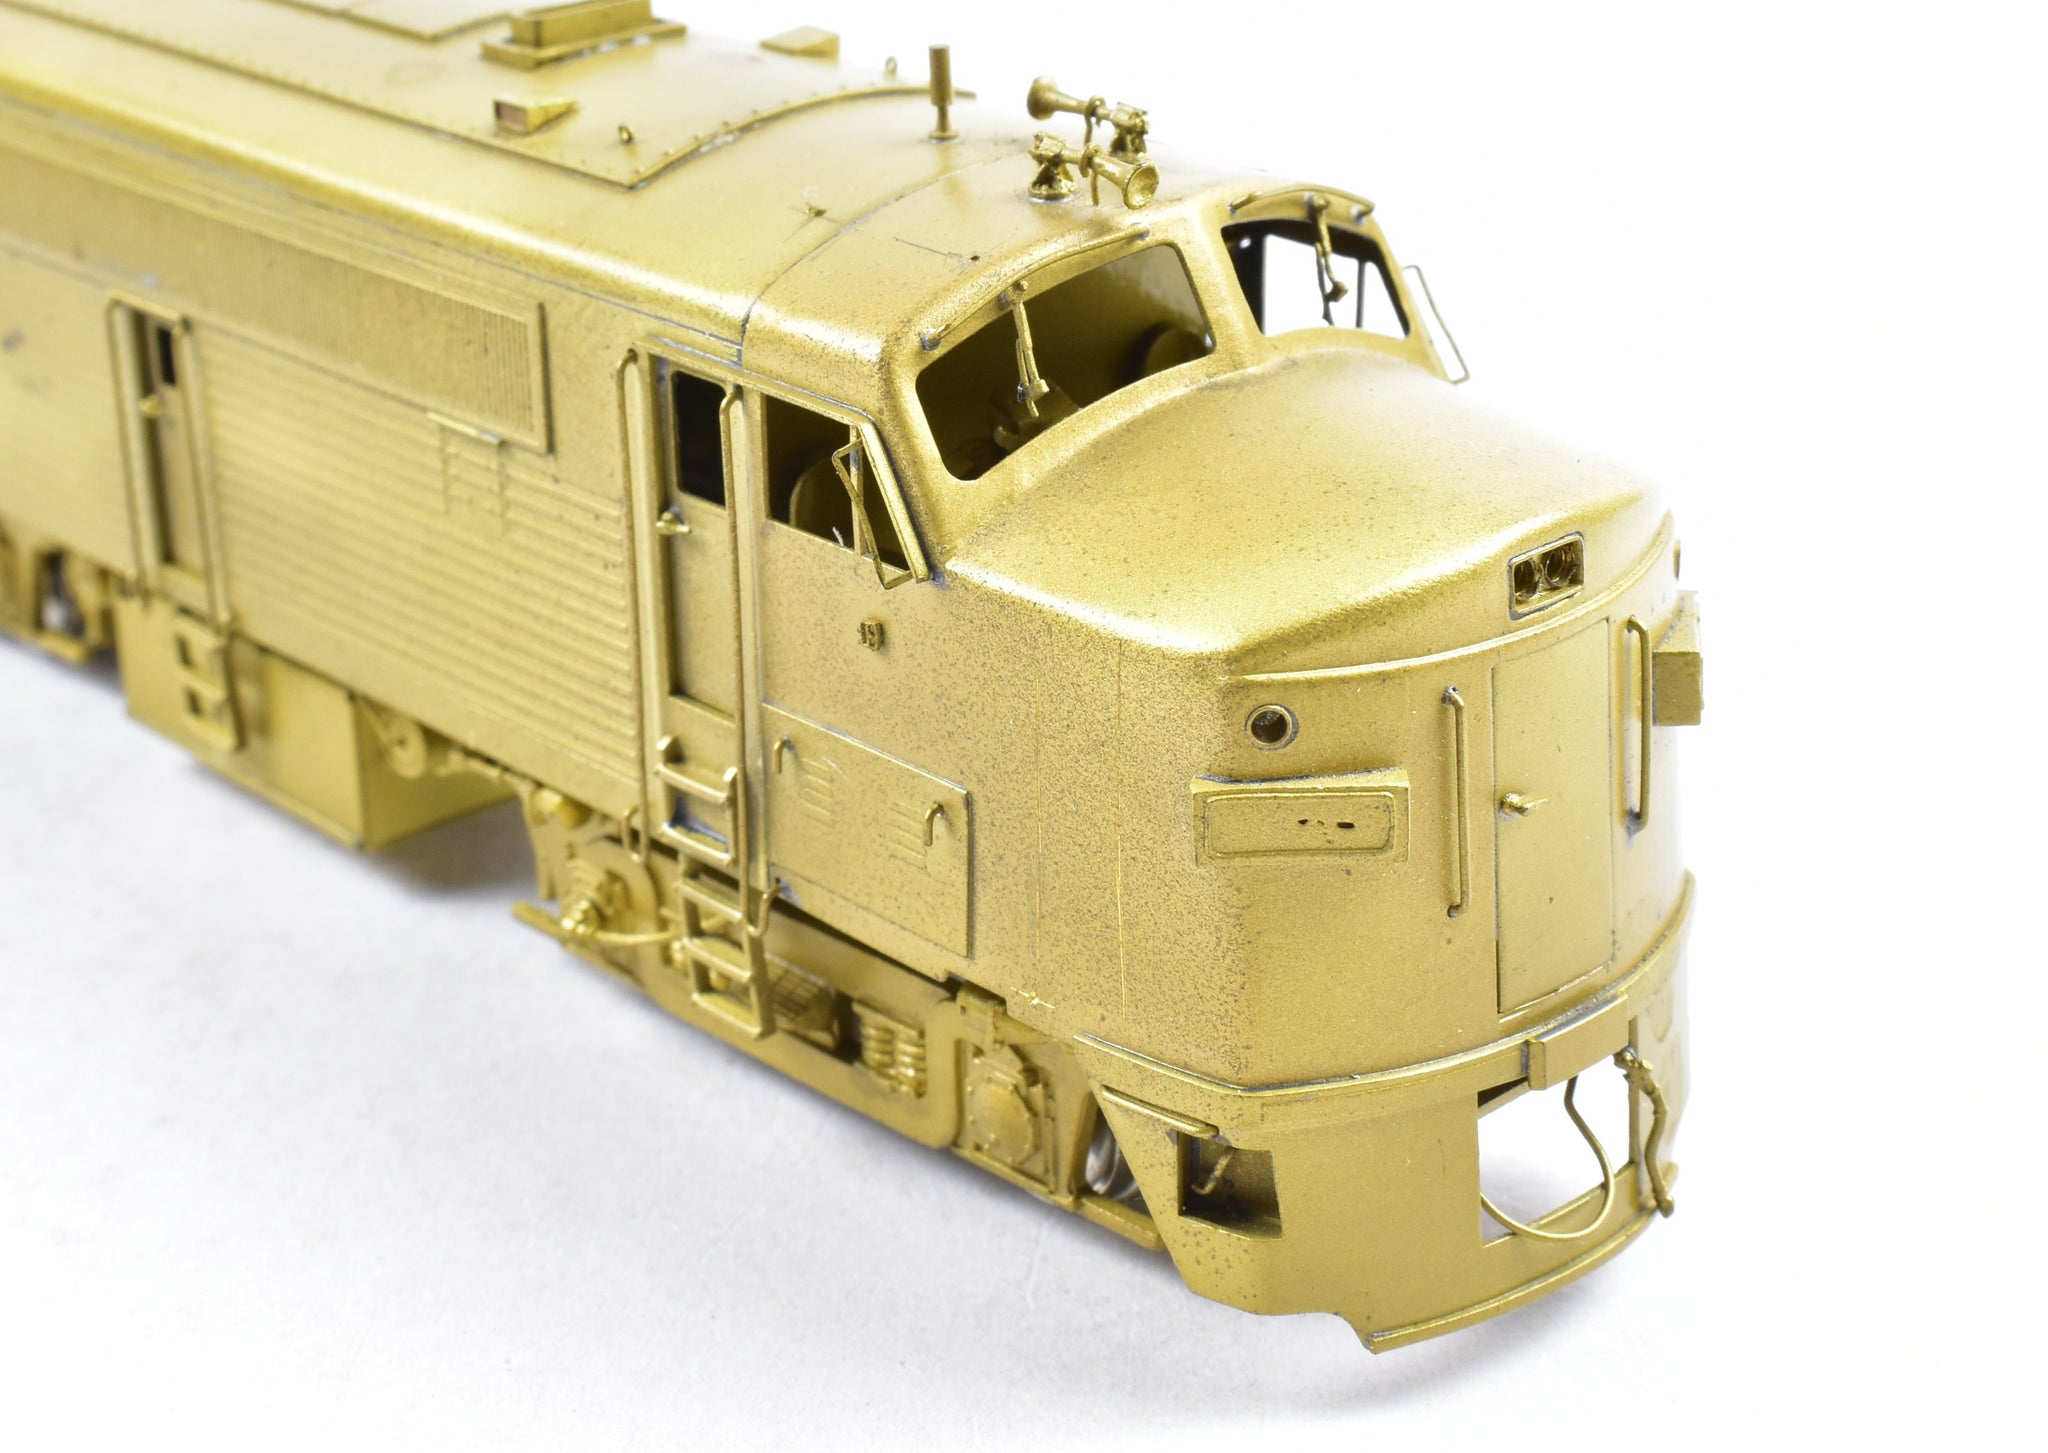 Sold at Auction: Pair of Overland Models HO brass Union Pacific CH-90-5  hoppers one painted and one unpainted